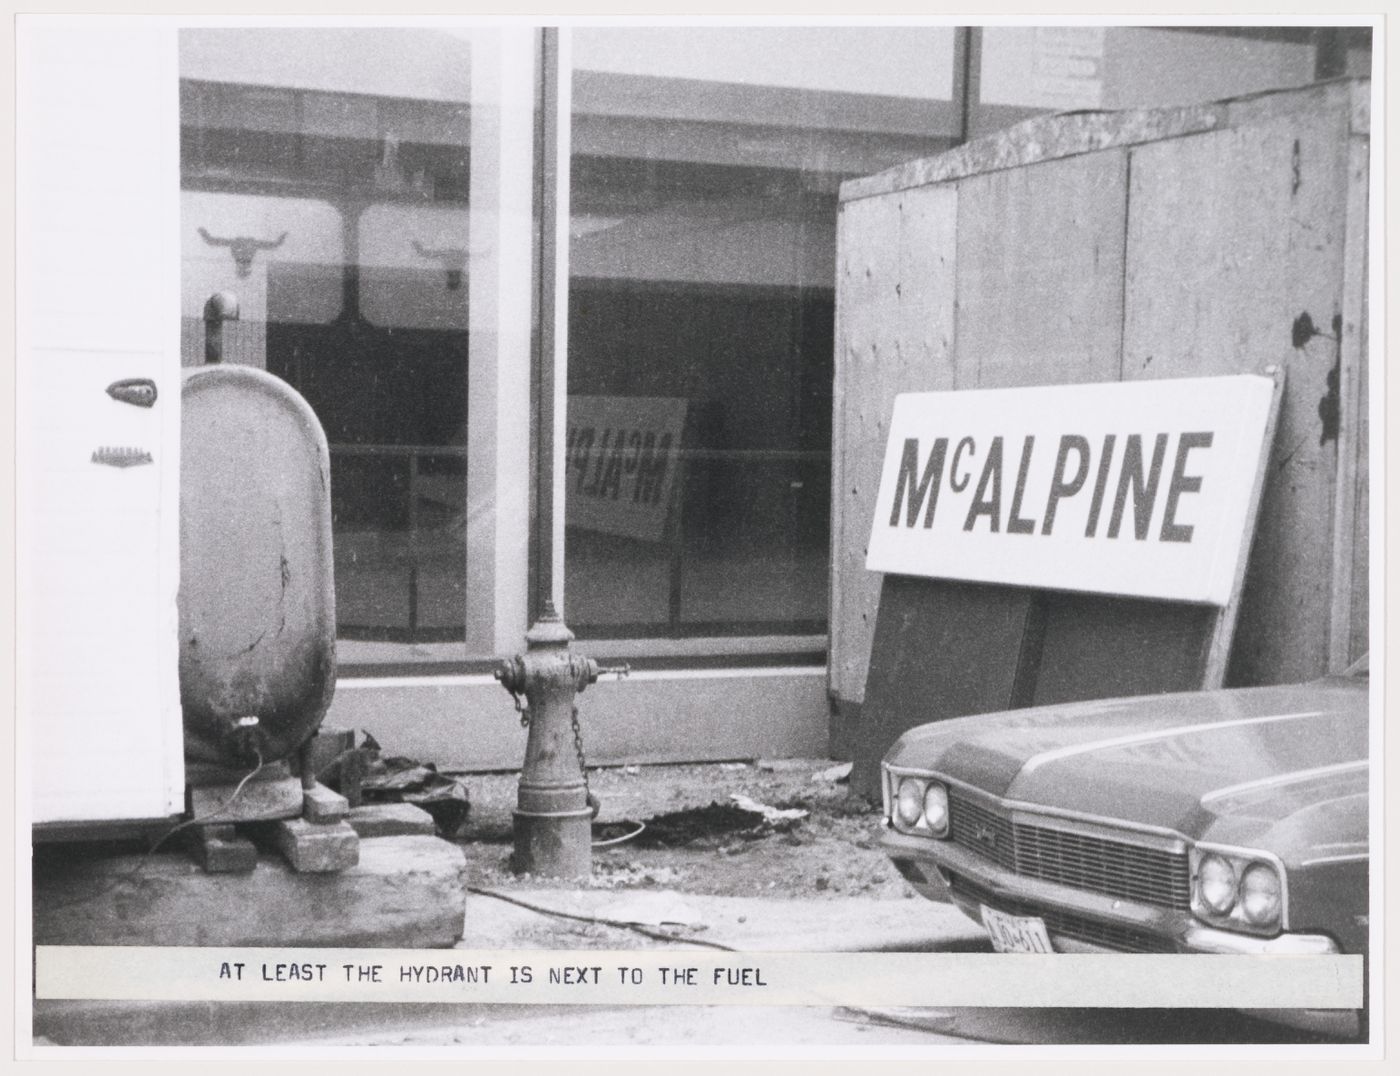 McAppy: view of construction site with fuel tank and fire hydrant